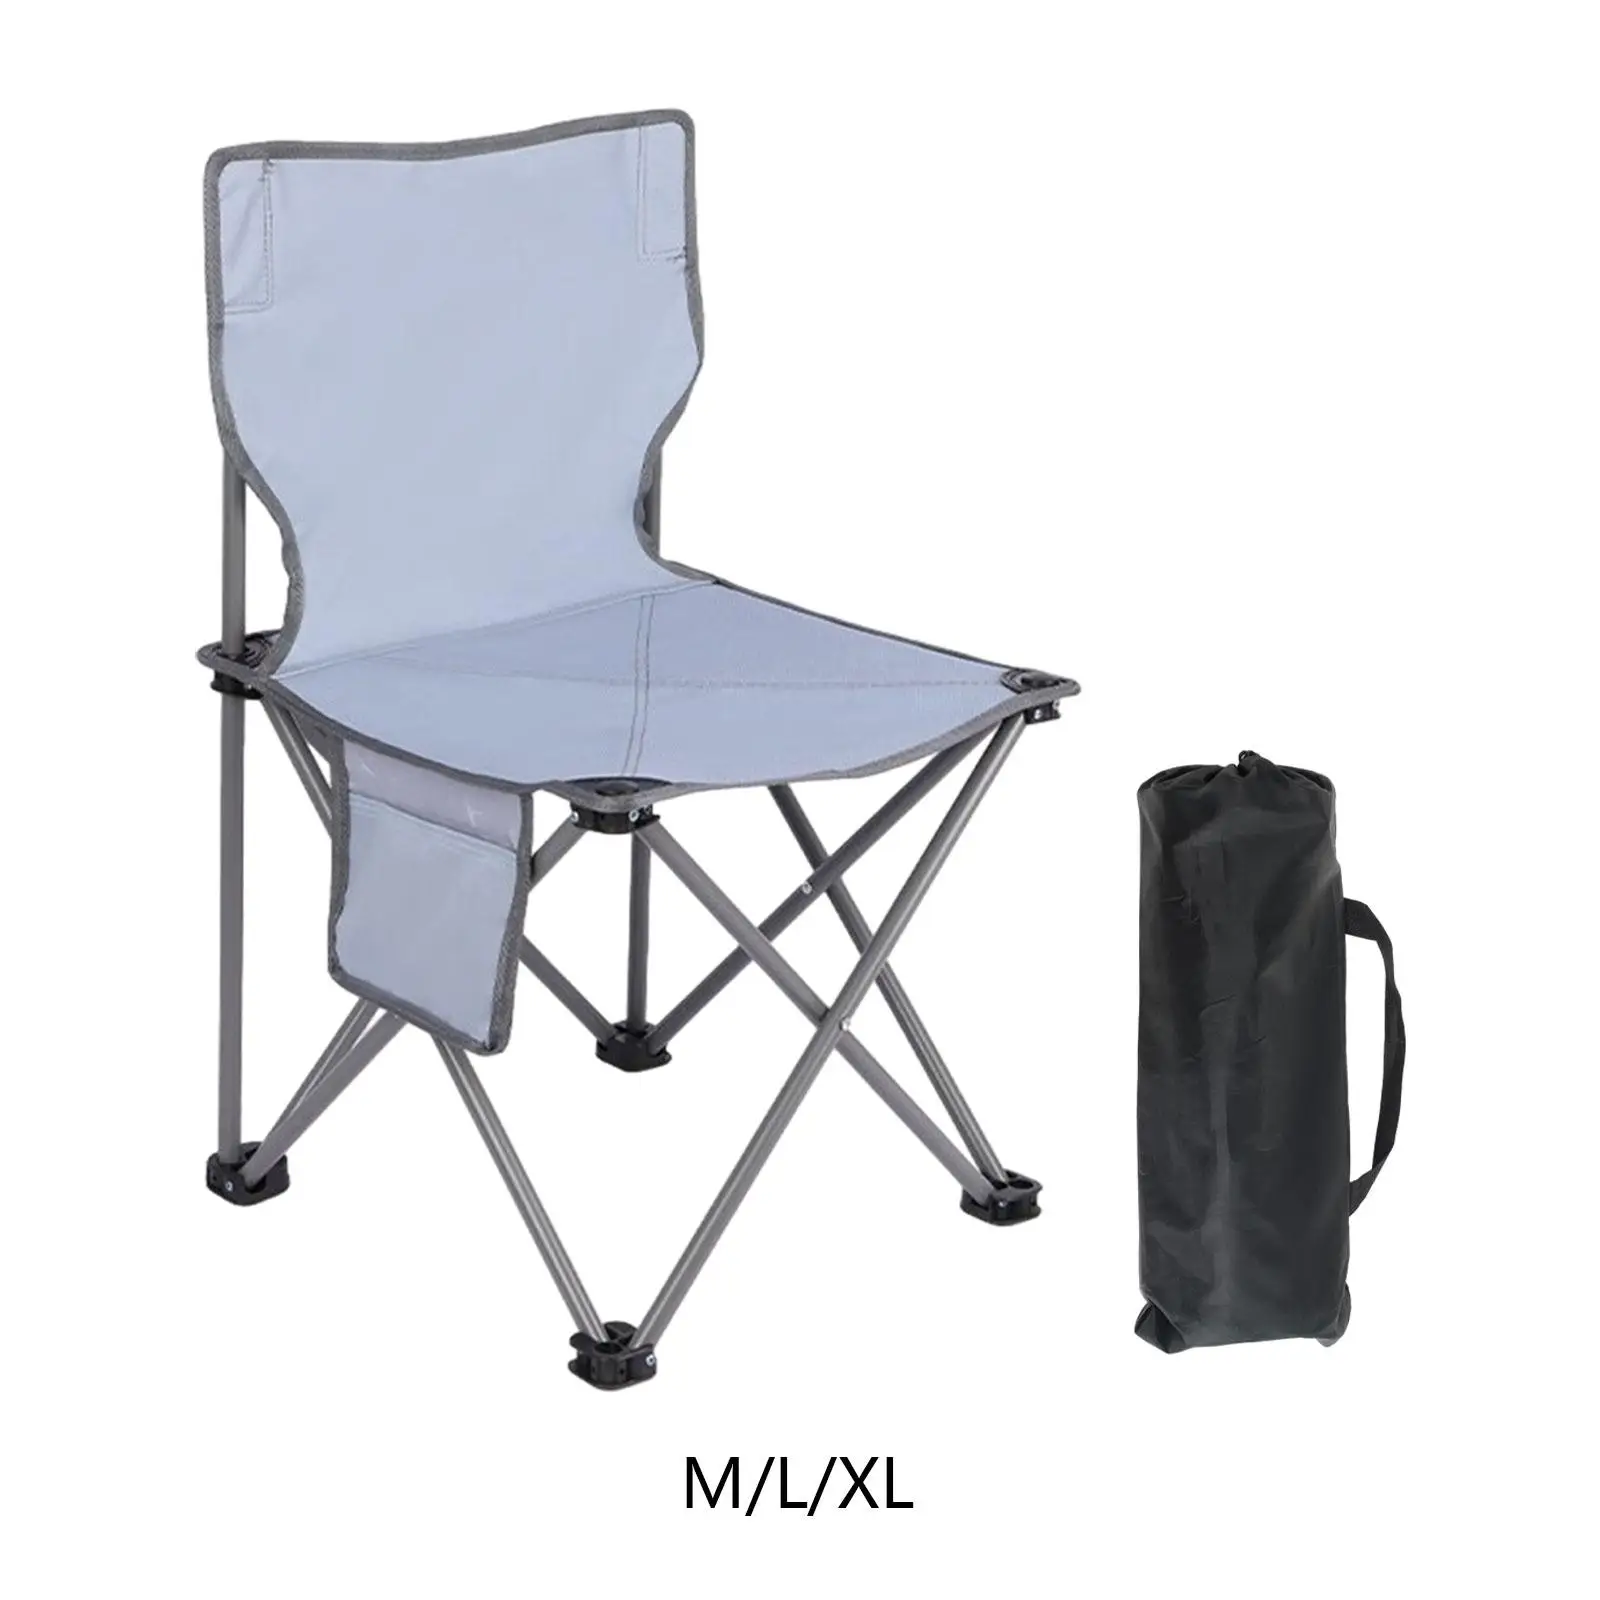 Portable Camping Chair with Storage Bag Outdoor Furniture Folding Chair for Outside for Park Lawn Beach Hiking Backpacking